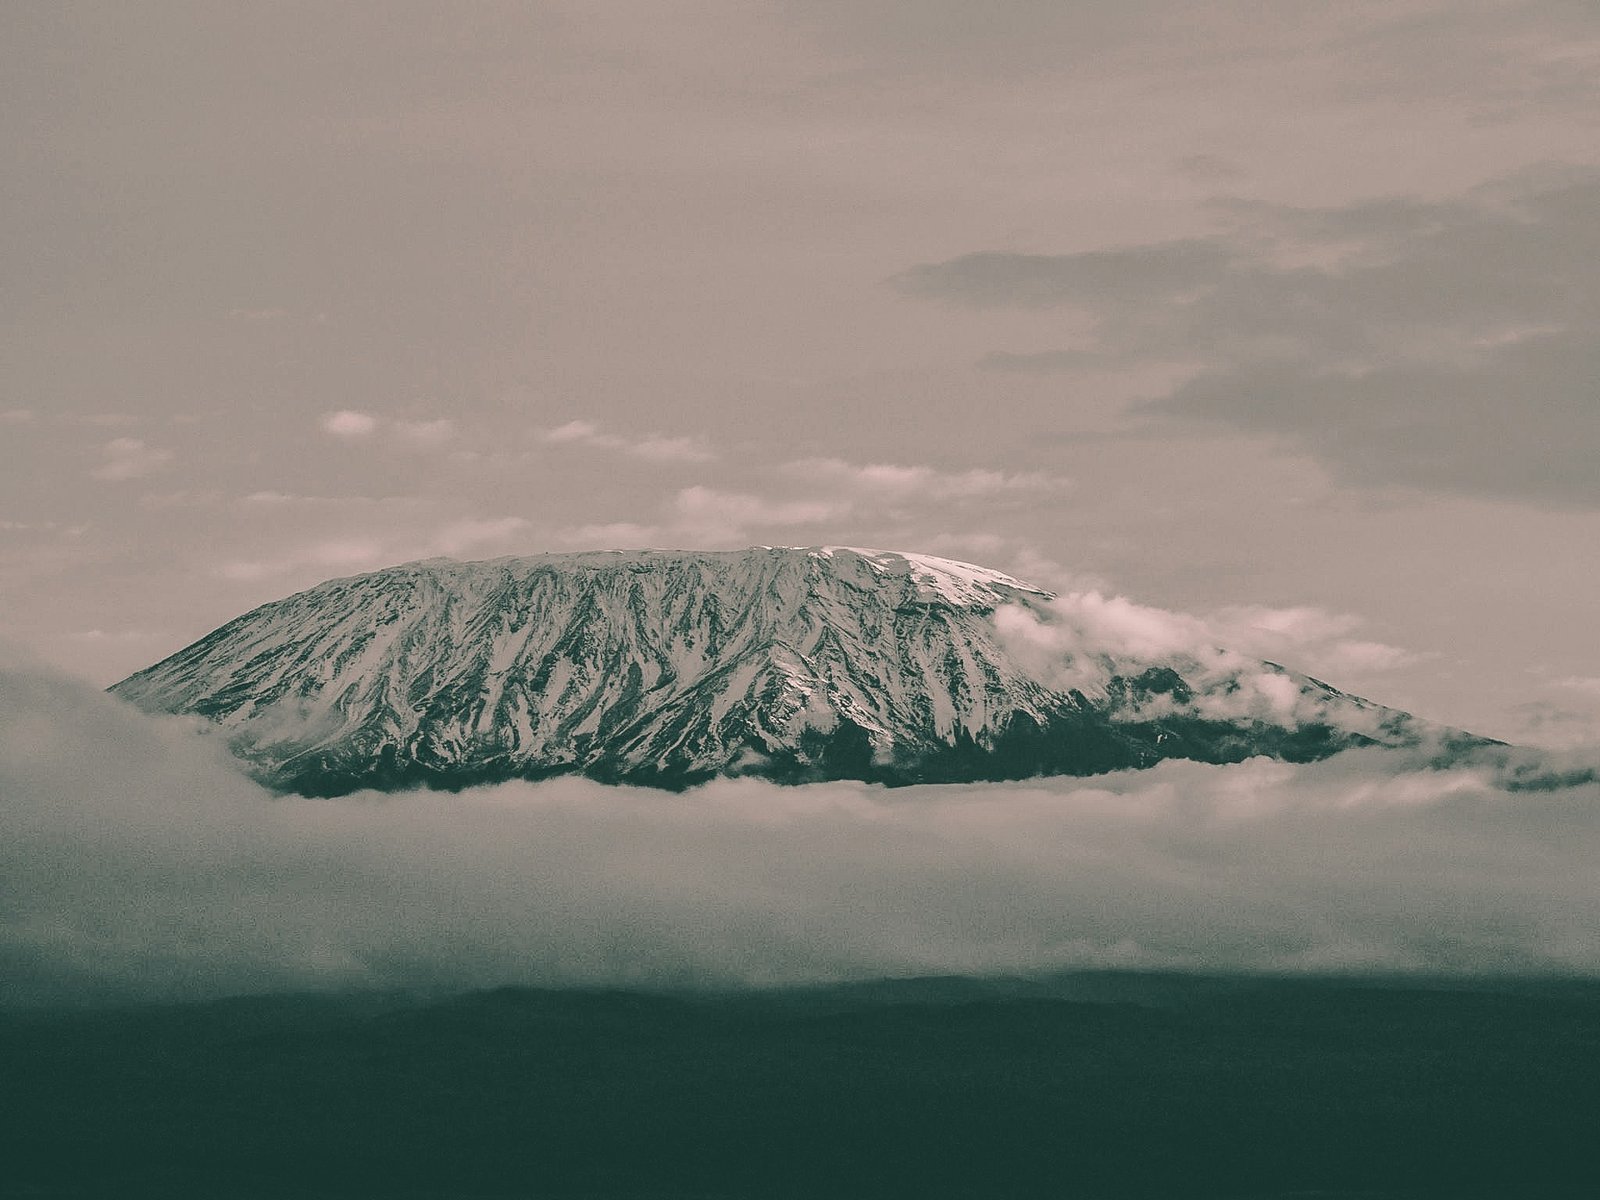 Reaching the Roof of Africa: What Awaits at the Top of Mount Kilimanjaro?